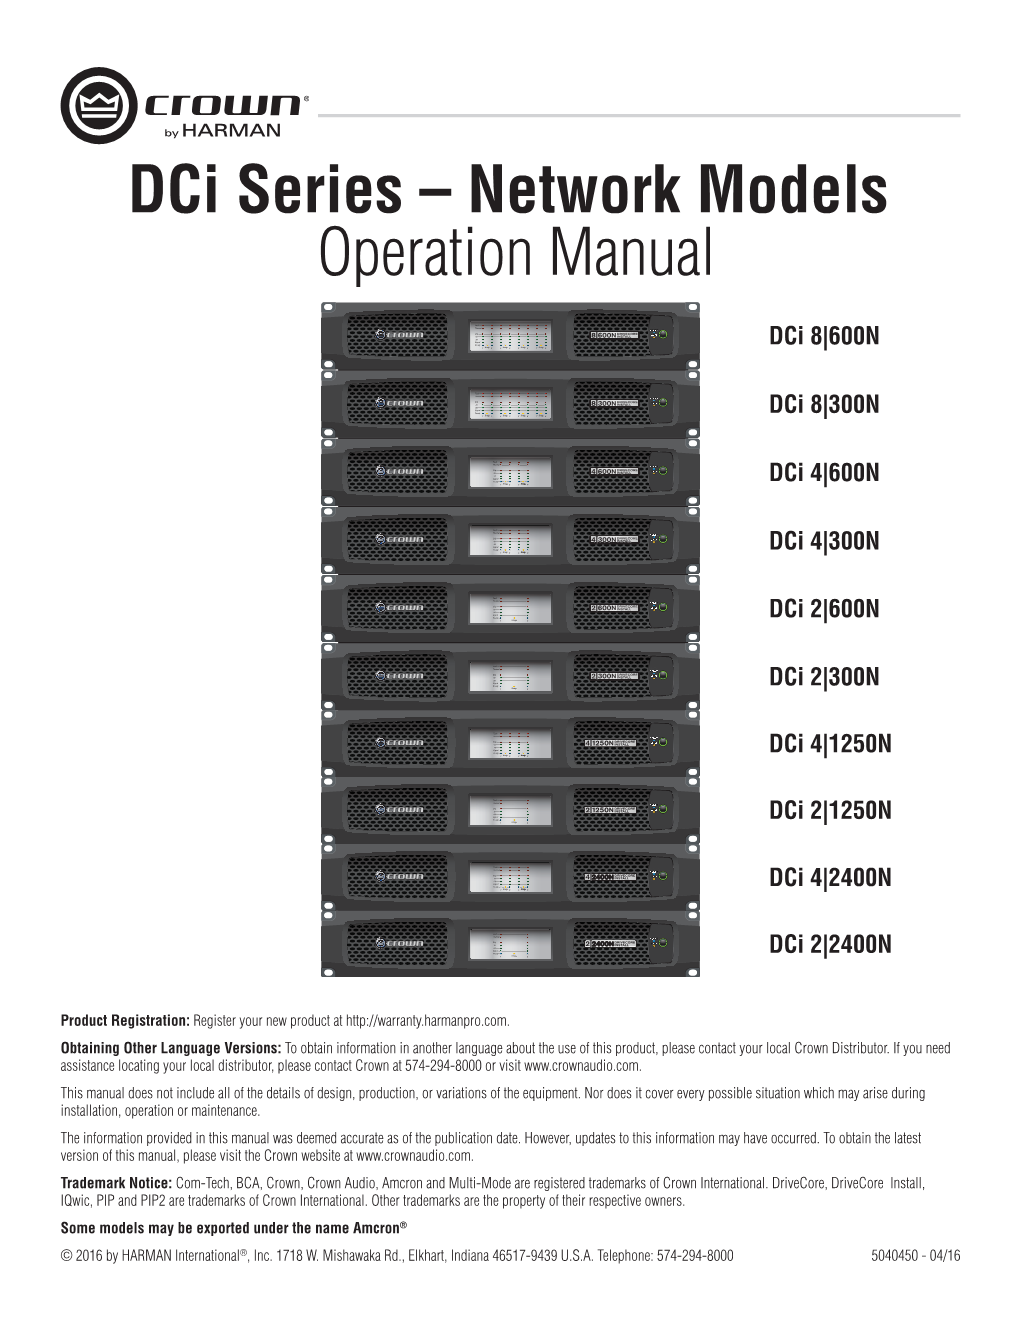 Dci Series – Network Models Operation Manual